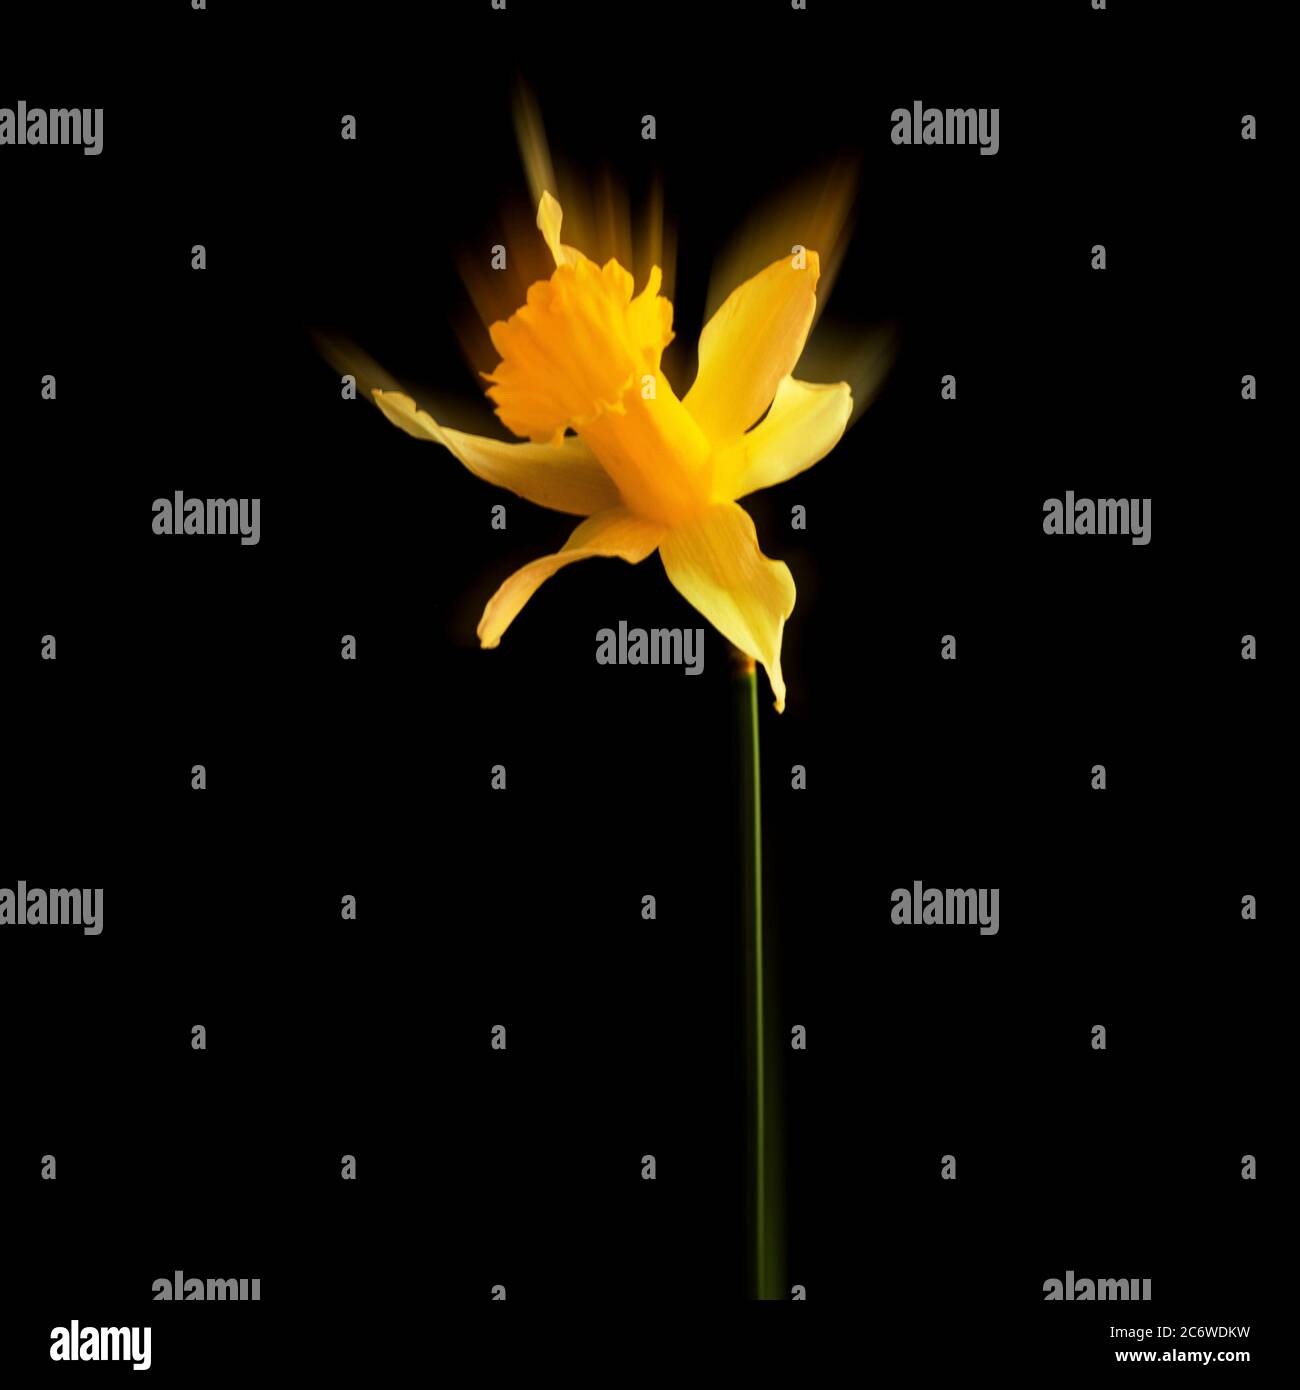 Close-up of daffodil on a black background Stock Photo